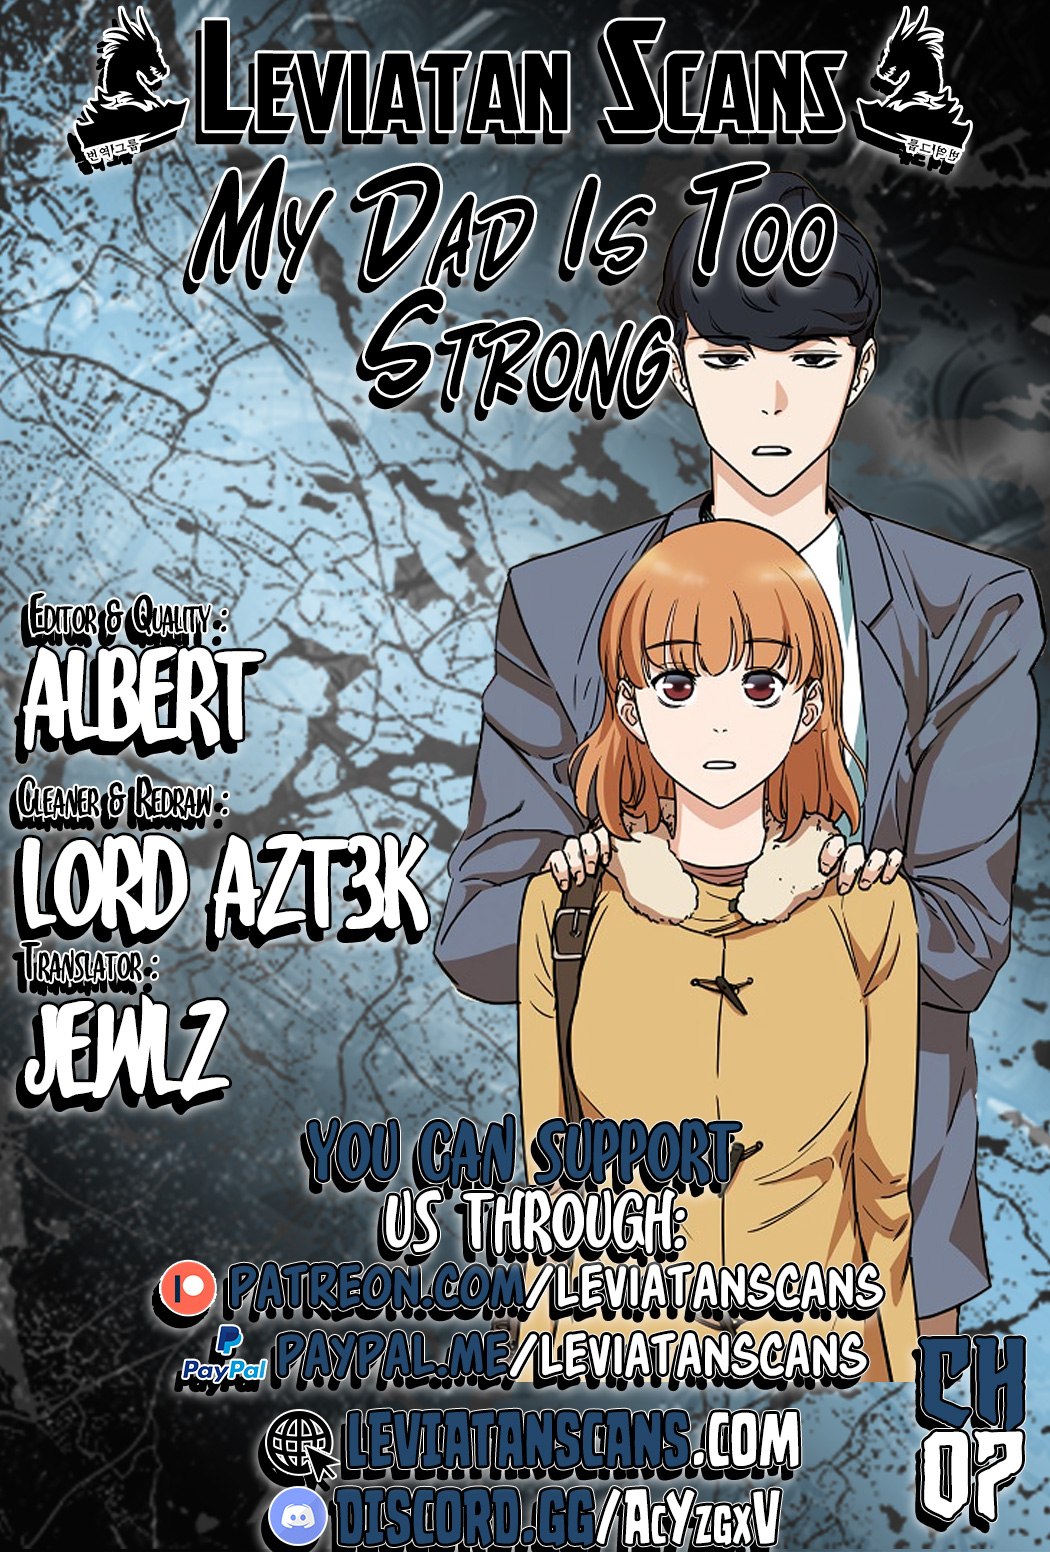 My Dad is Too Strong - Chapter 2586 - Image 1